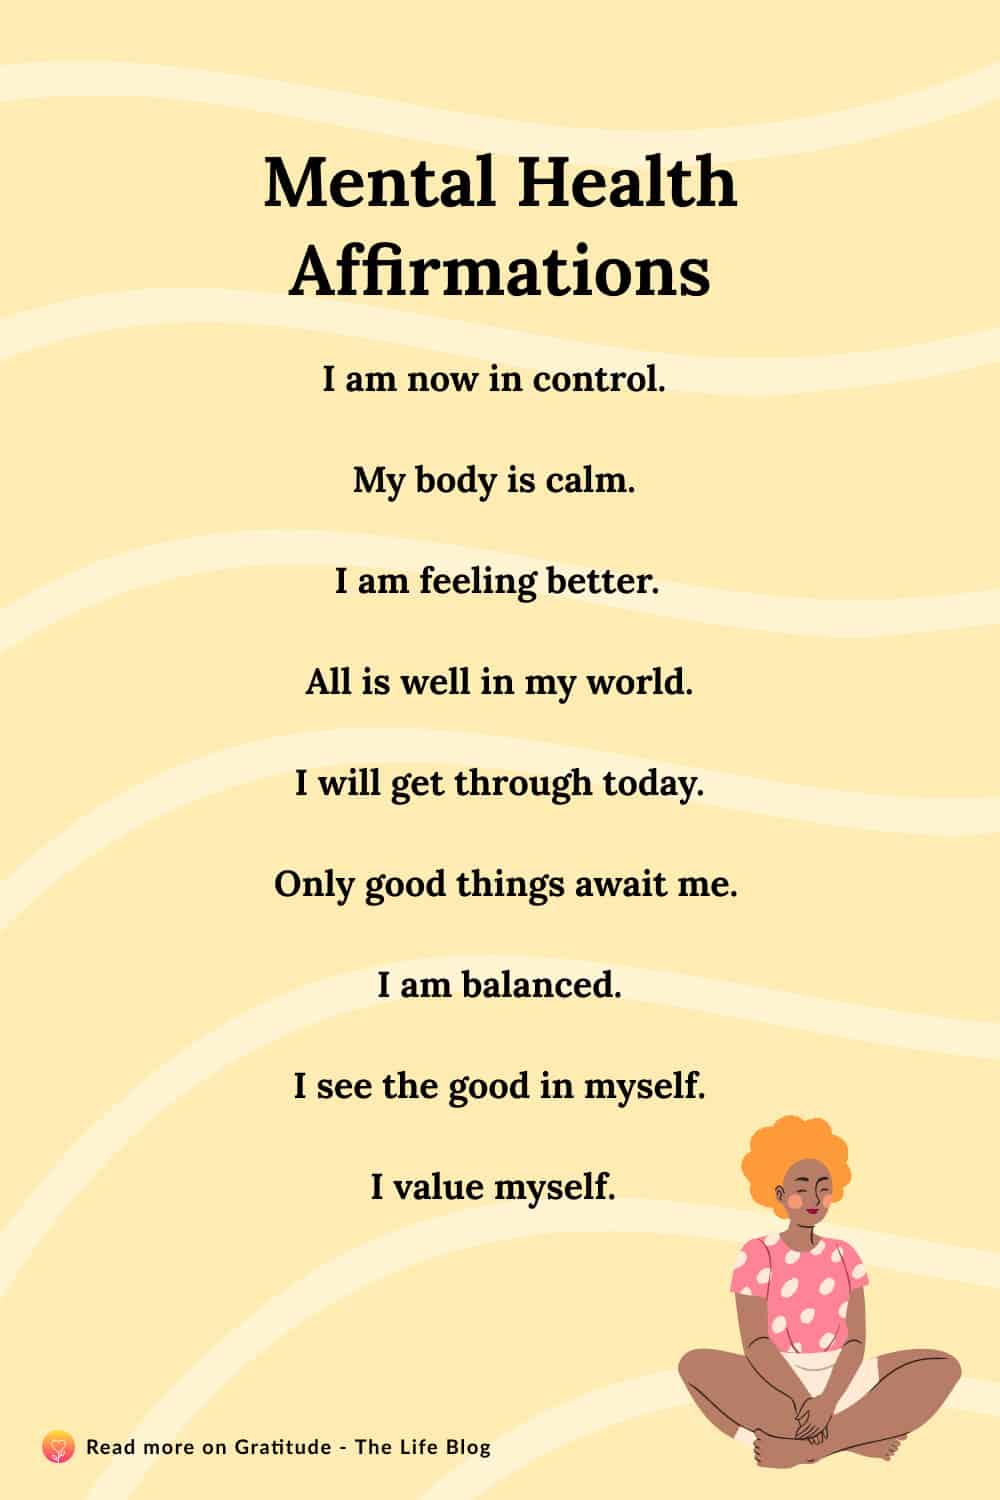 Image with list of mental health affirmations